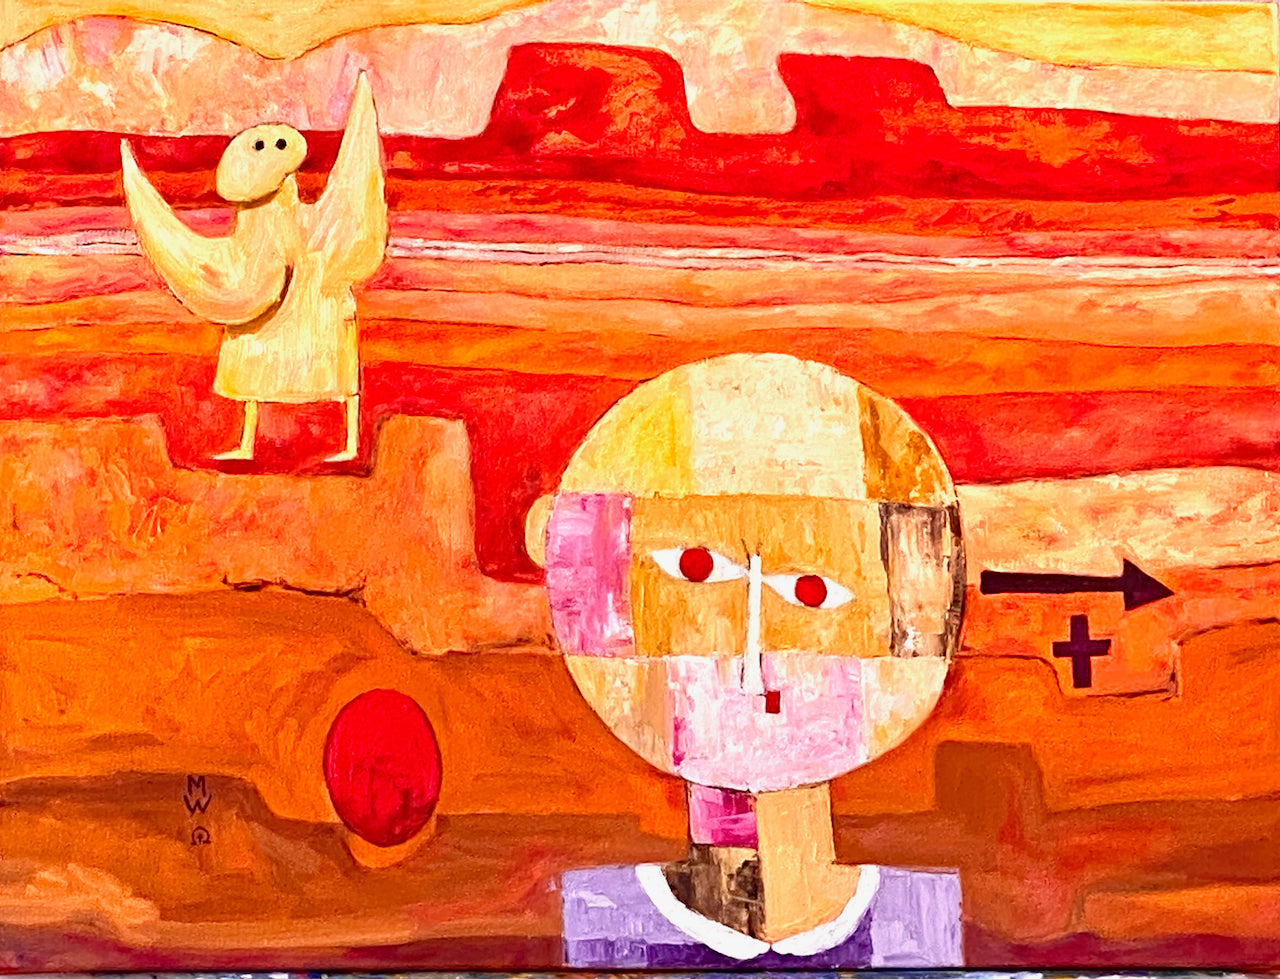 "Eve Leaving Eden 6" oil original by Marilyn Wells in oranges and reds, after Paul Klee